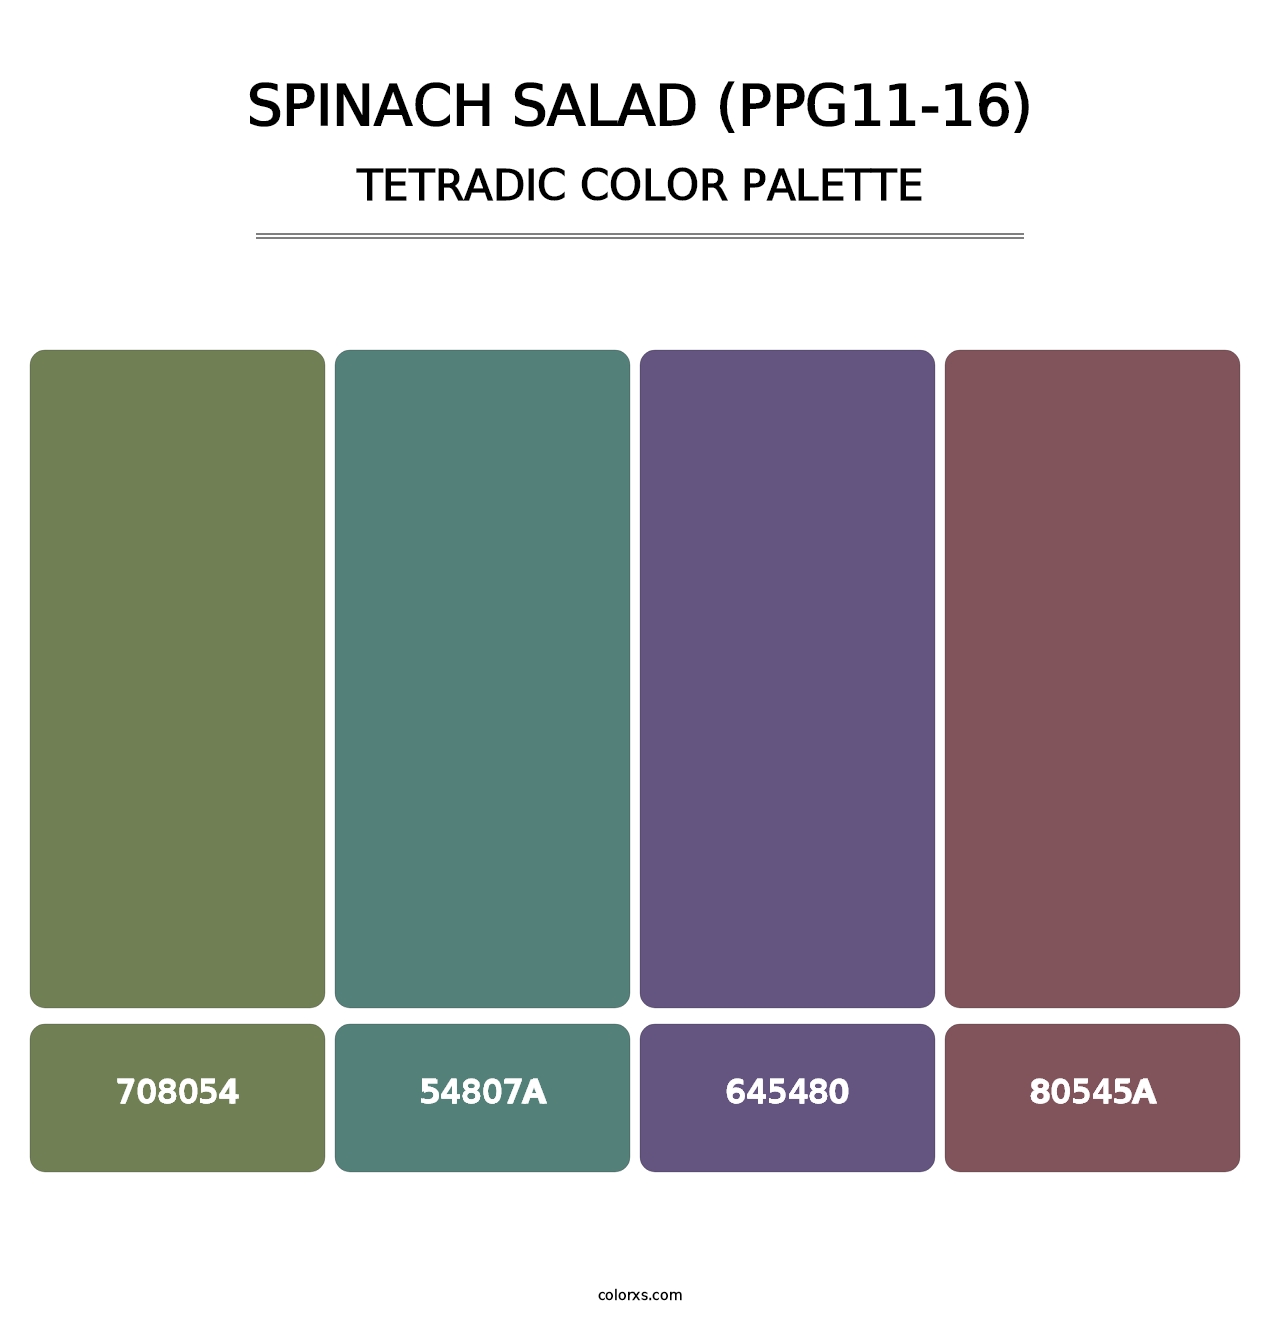 Spinach Salad (PPG11-16) - Tetradic Color Palette